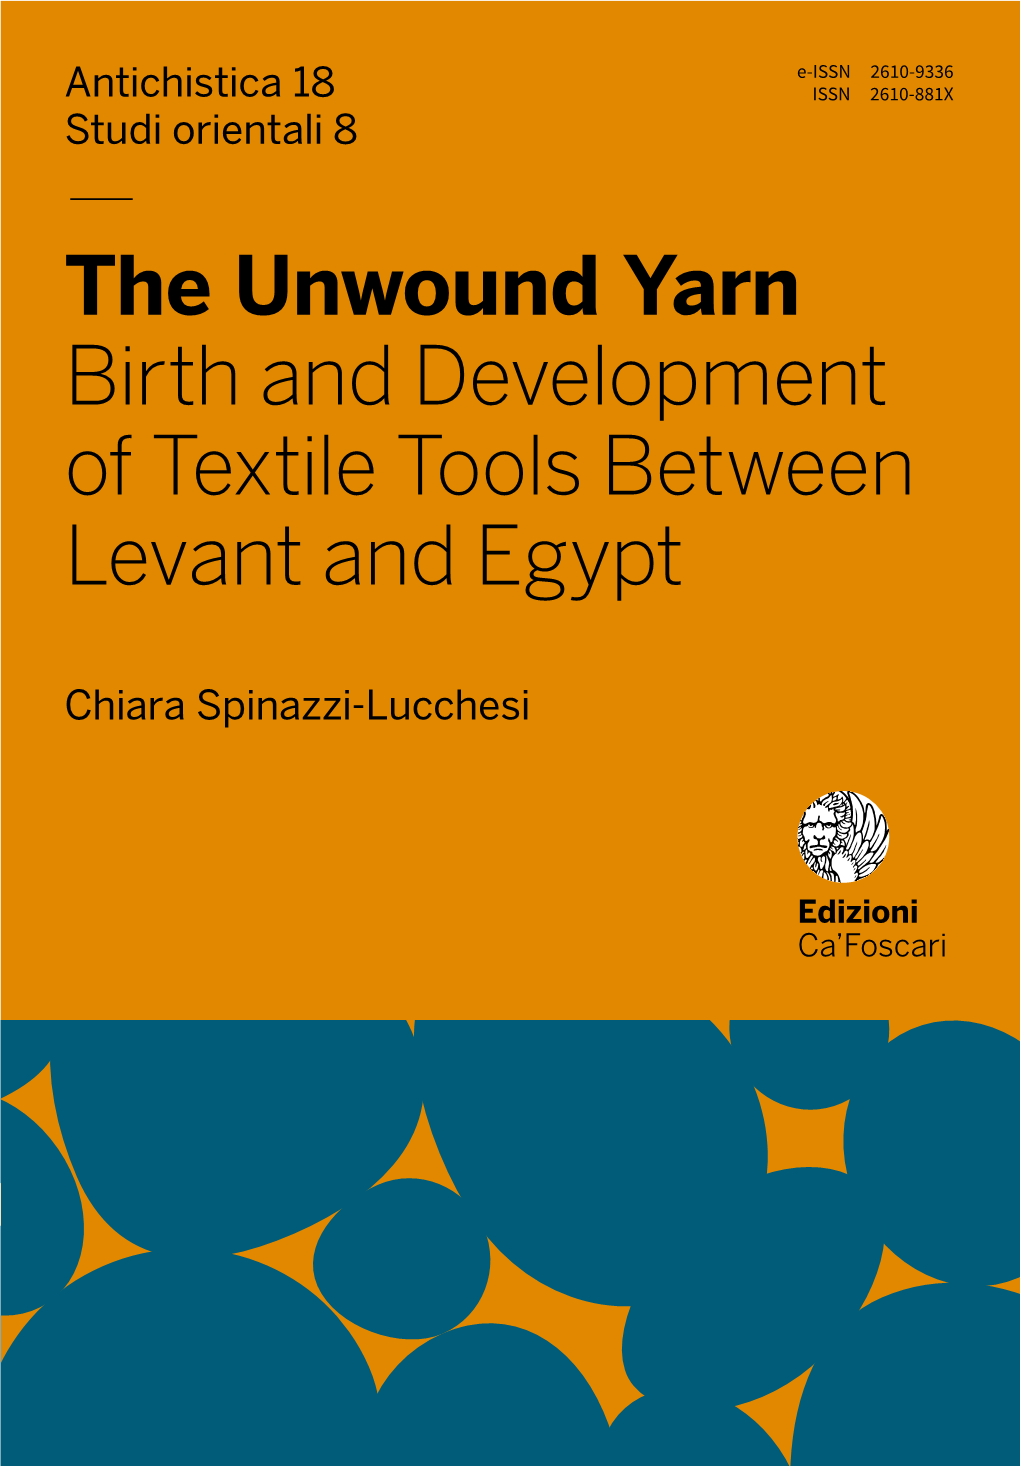 — the Unwound Yarn Birth and Development of Textile Tools